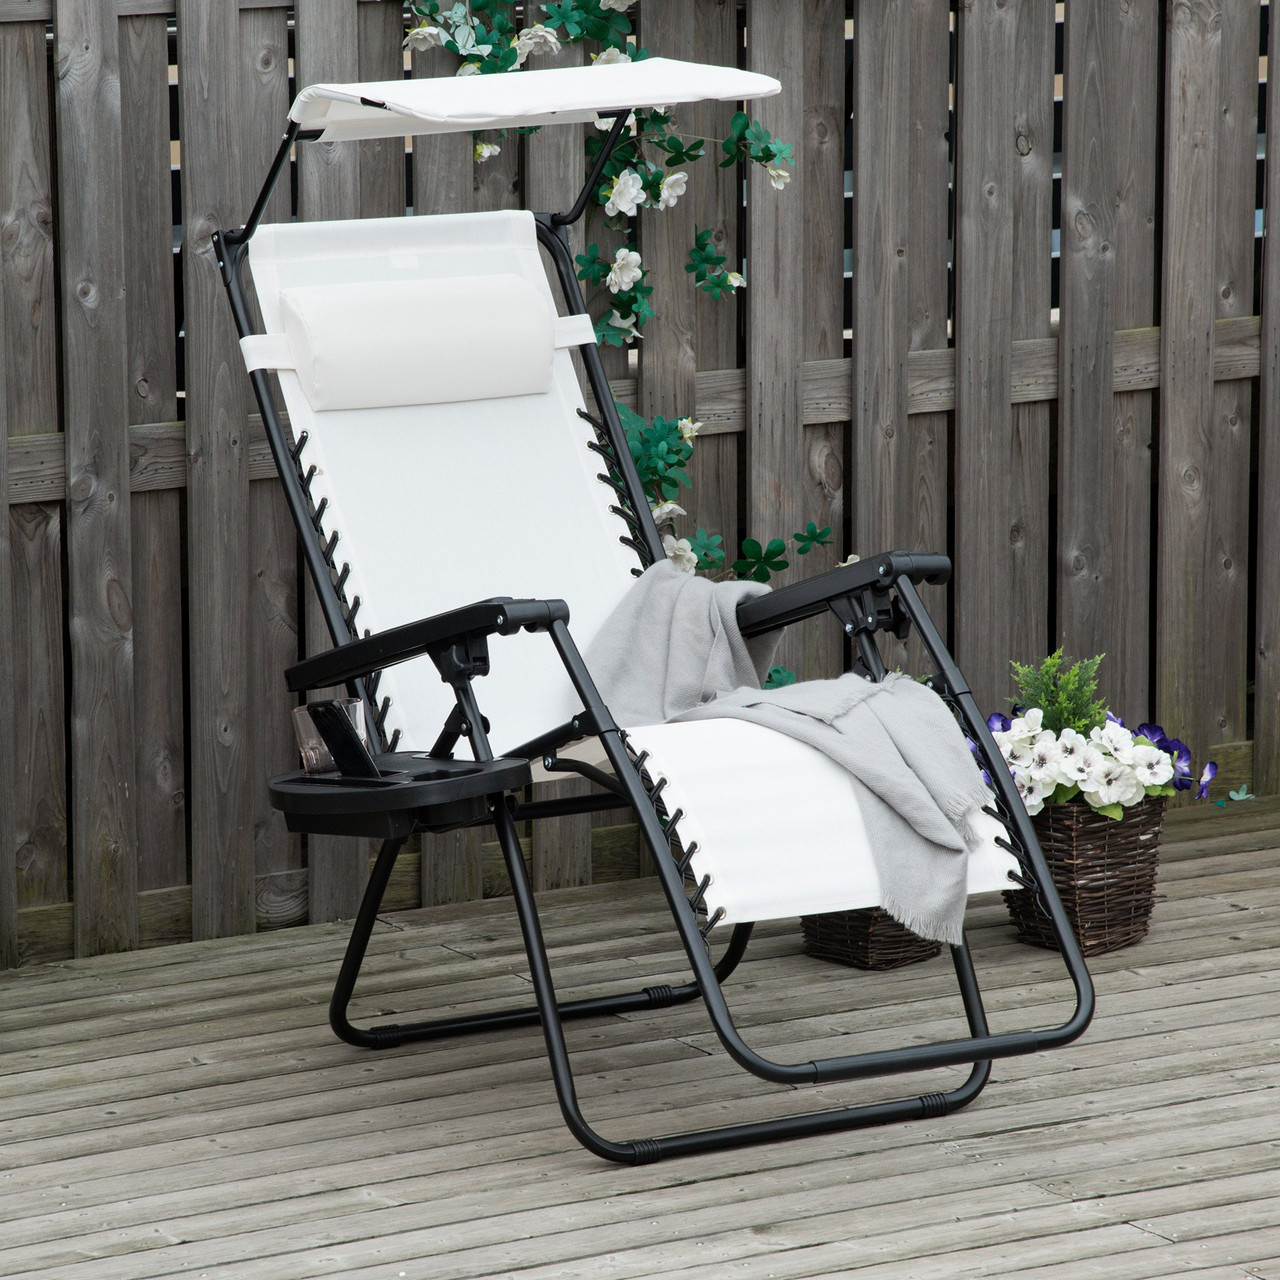 Steel Frame Zero Gravity Outdoor Garden Deck Chair with Canopy - Rictons